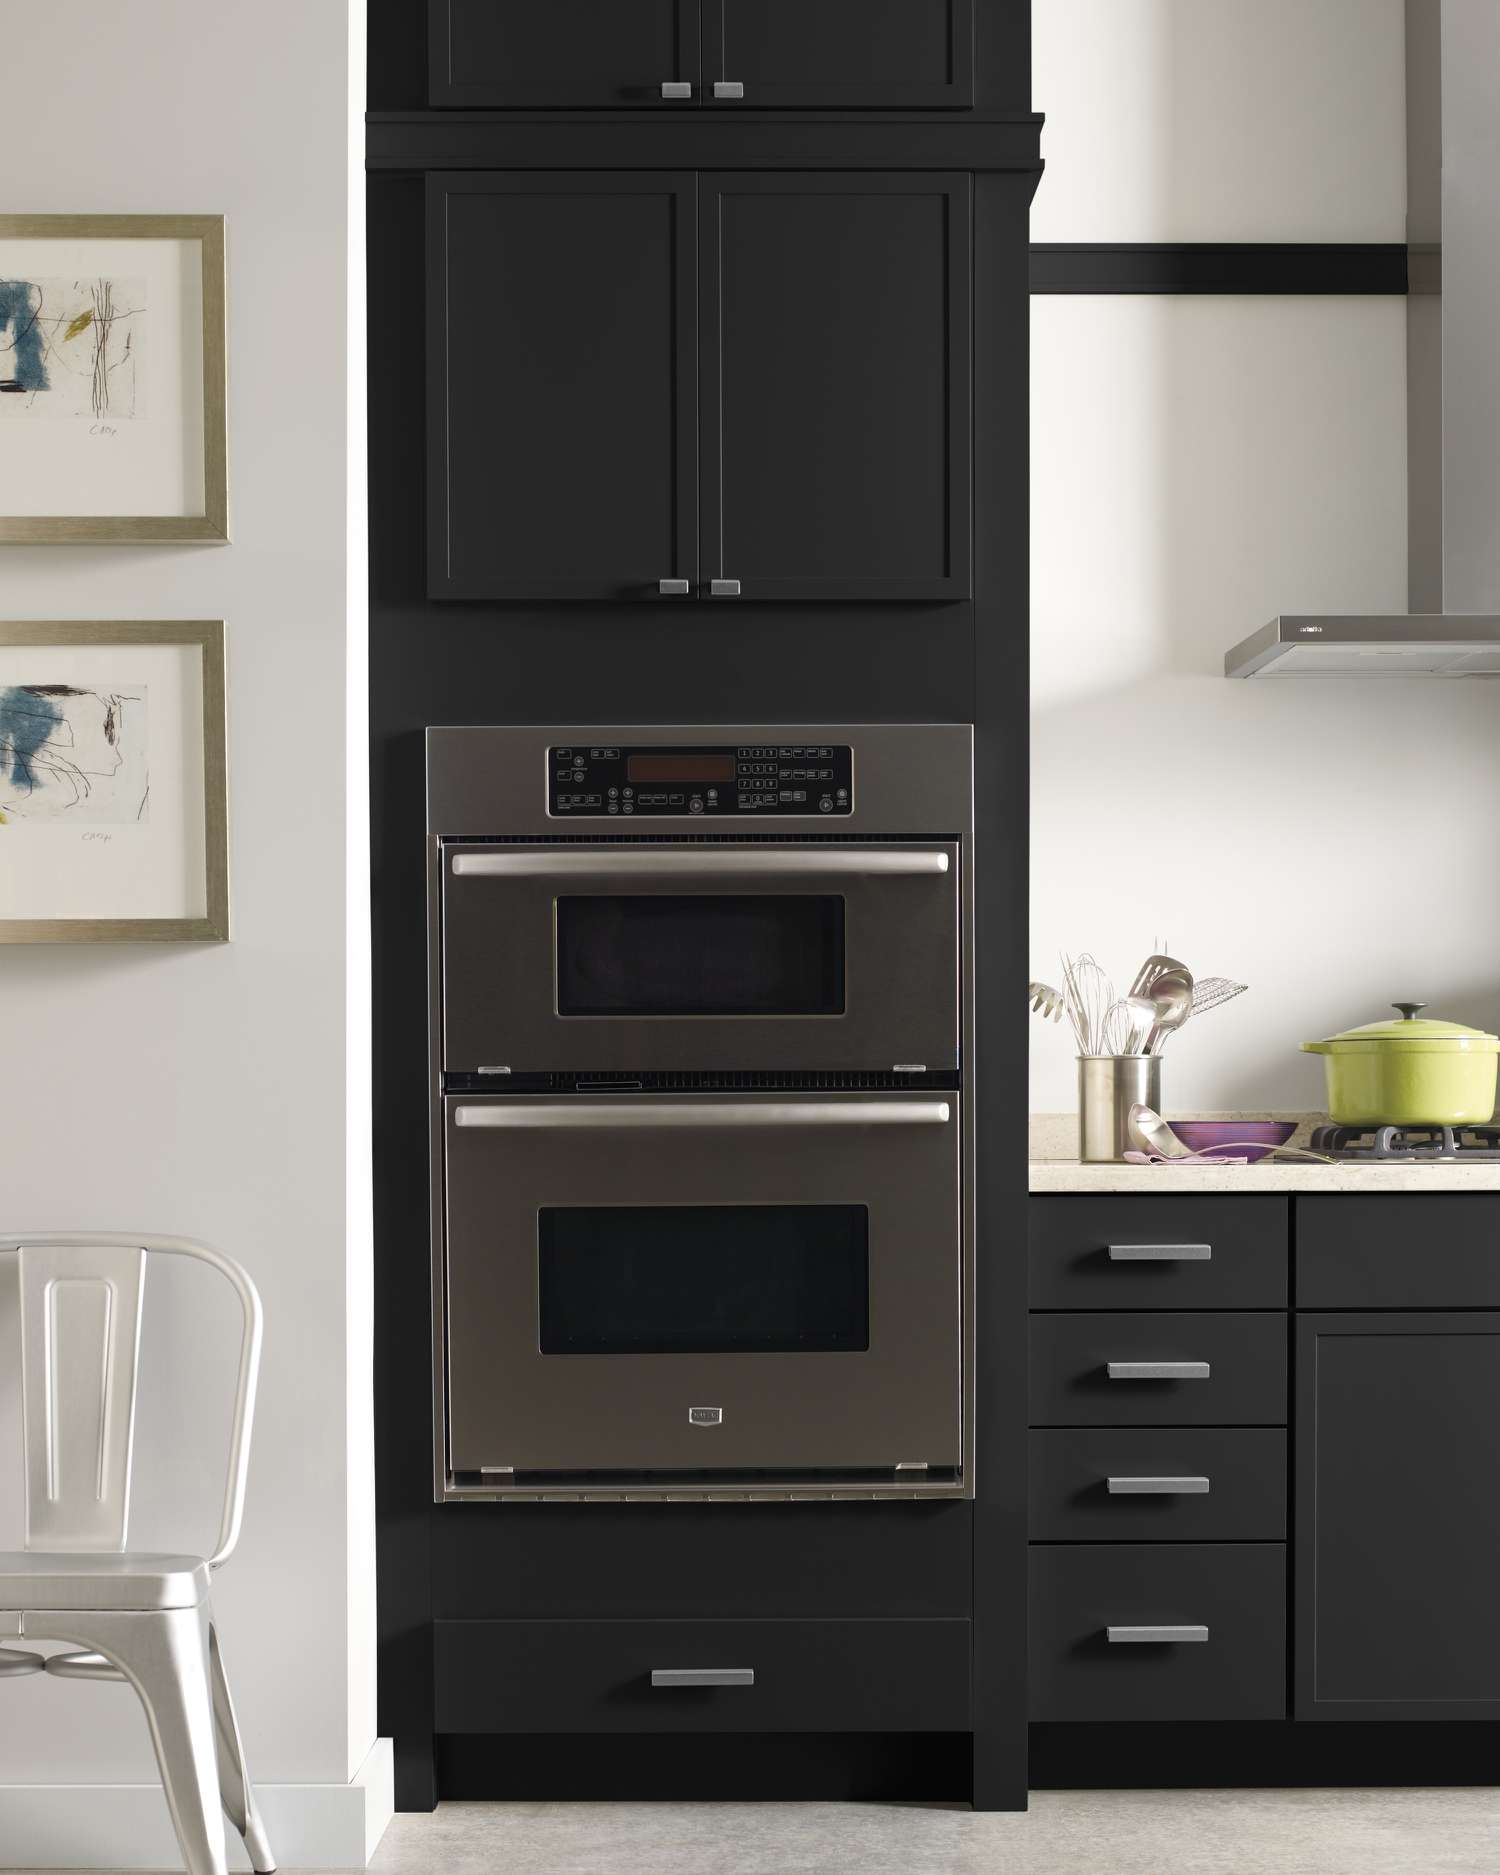 Double Oven Cabinet: Martha Stewart Living Perry Street Kitchen